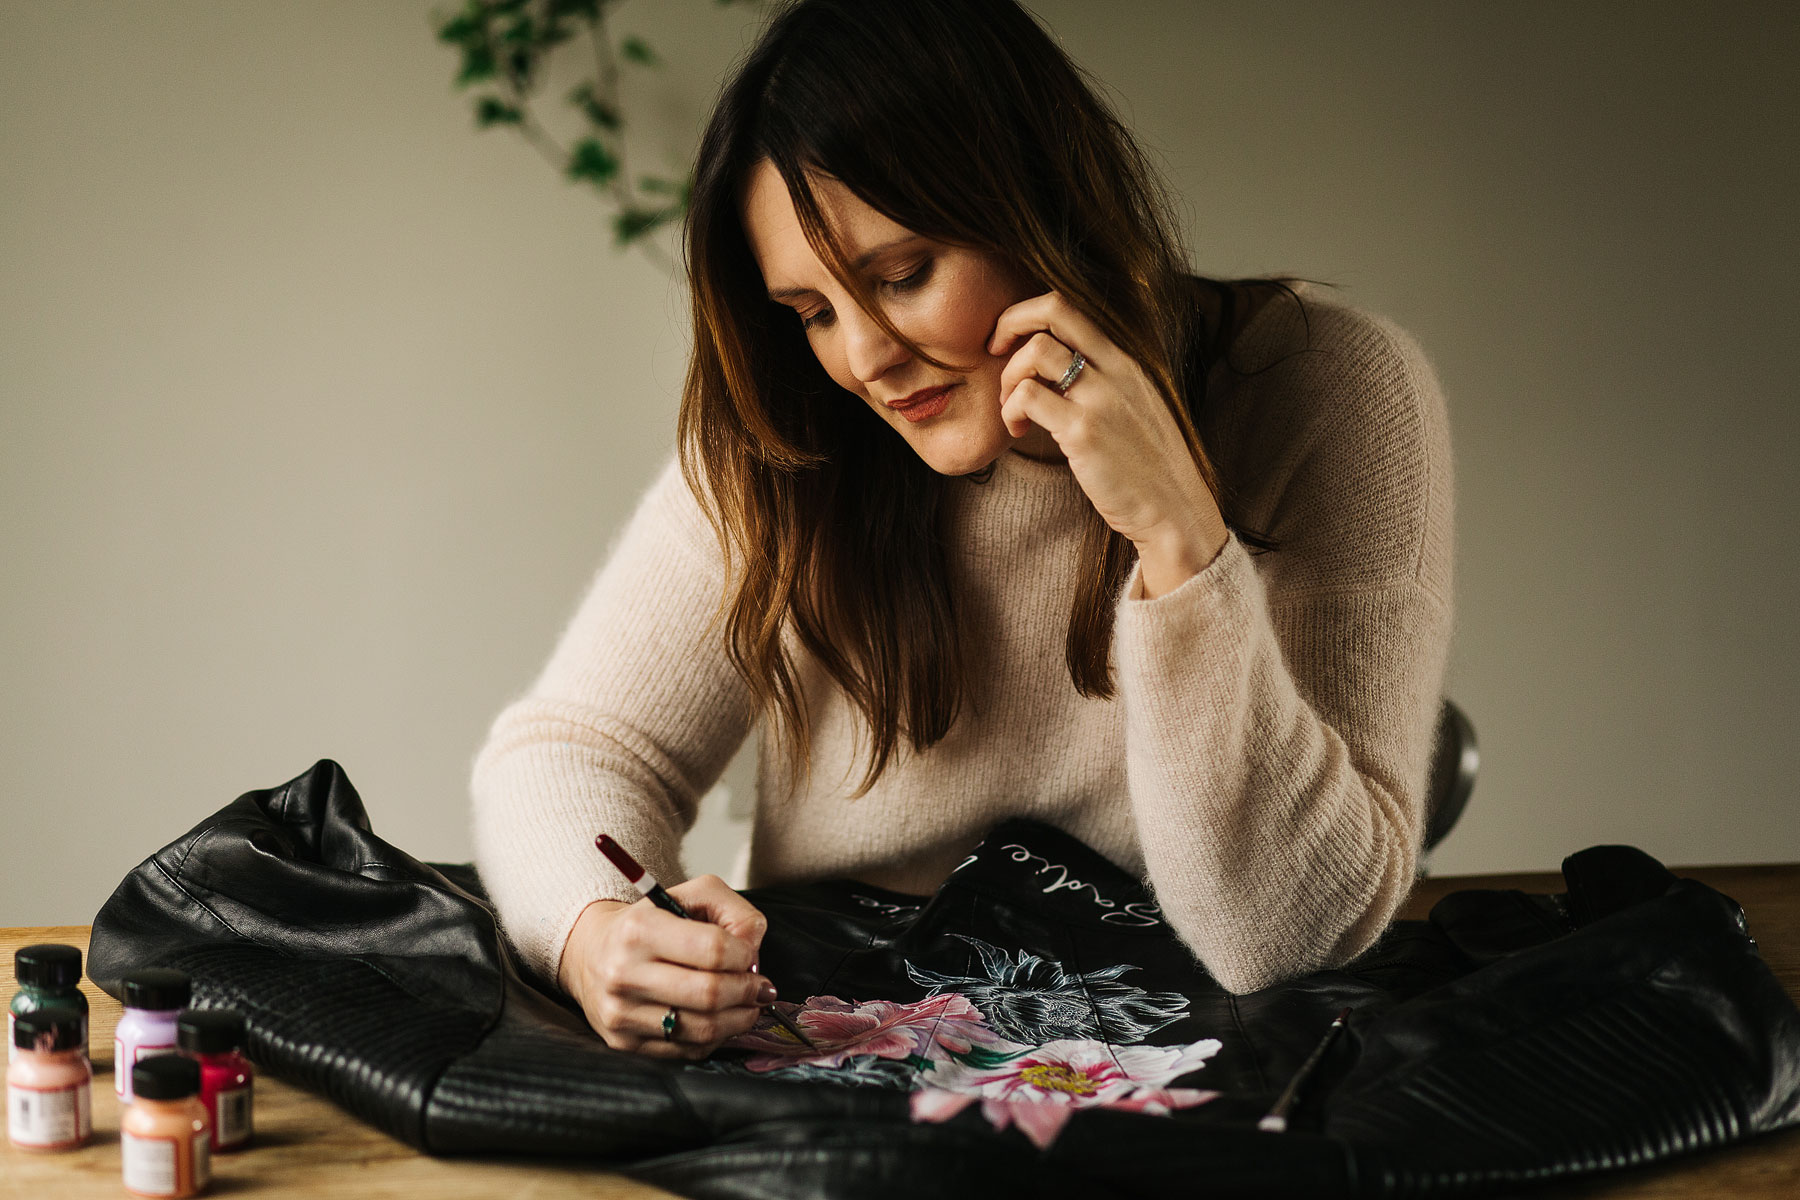 kate painting a wedding jacket for her small business commercial shoot